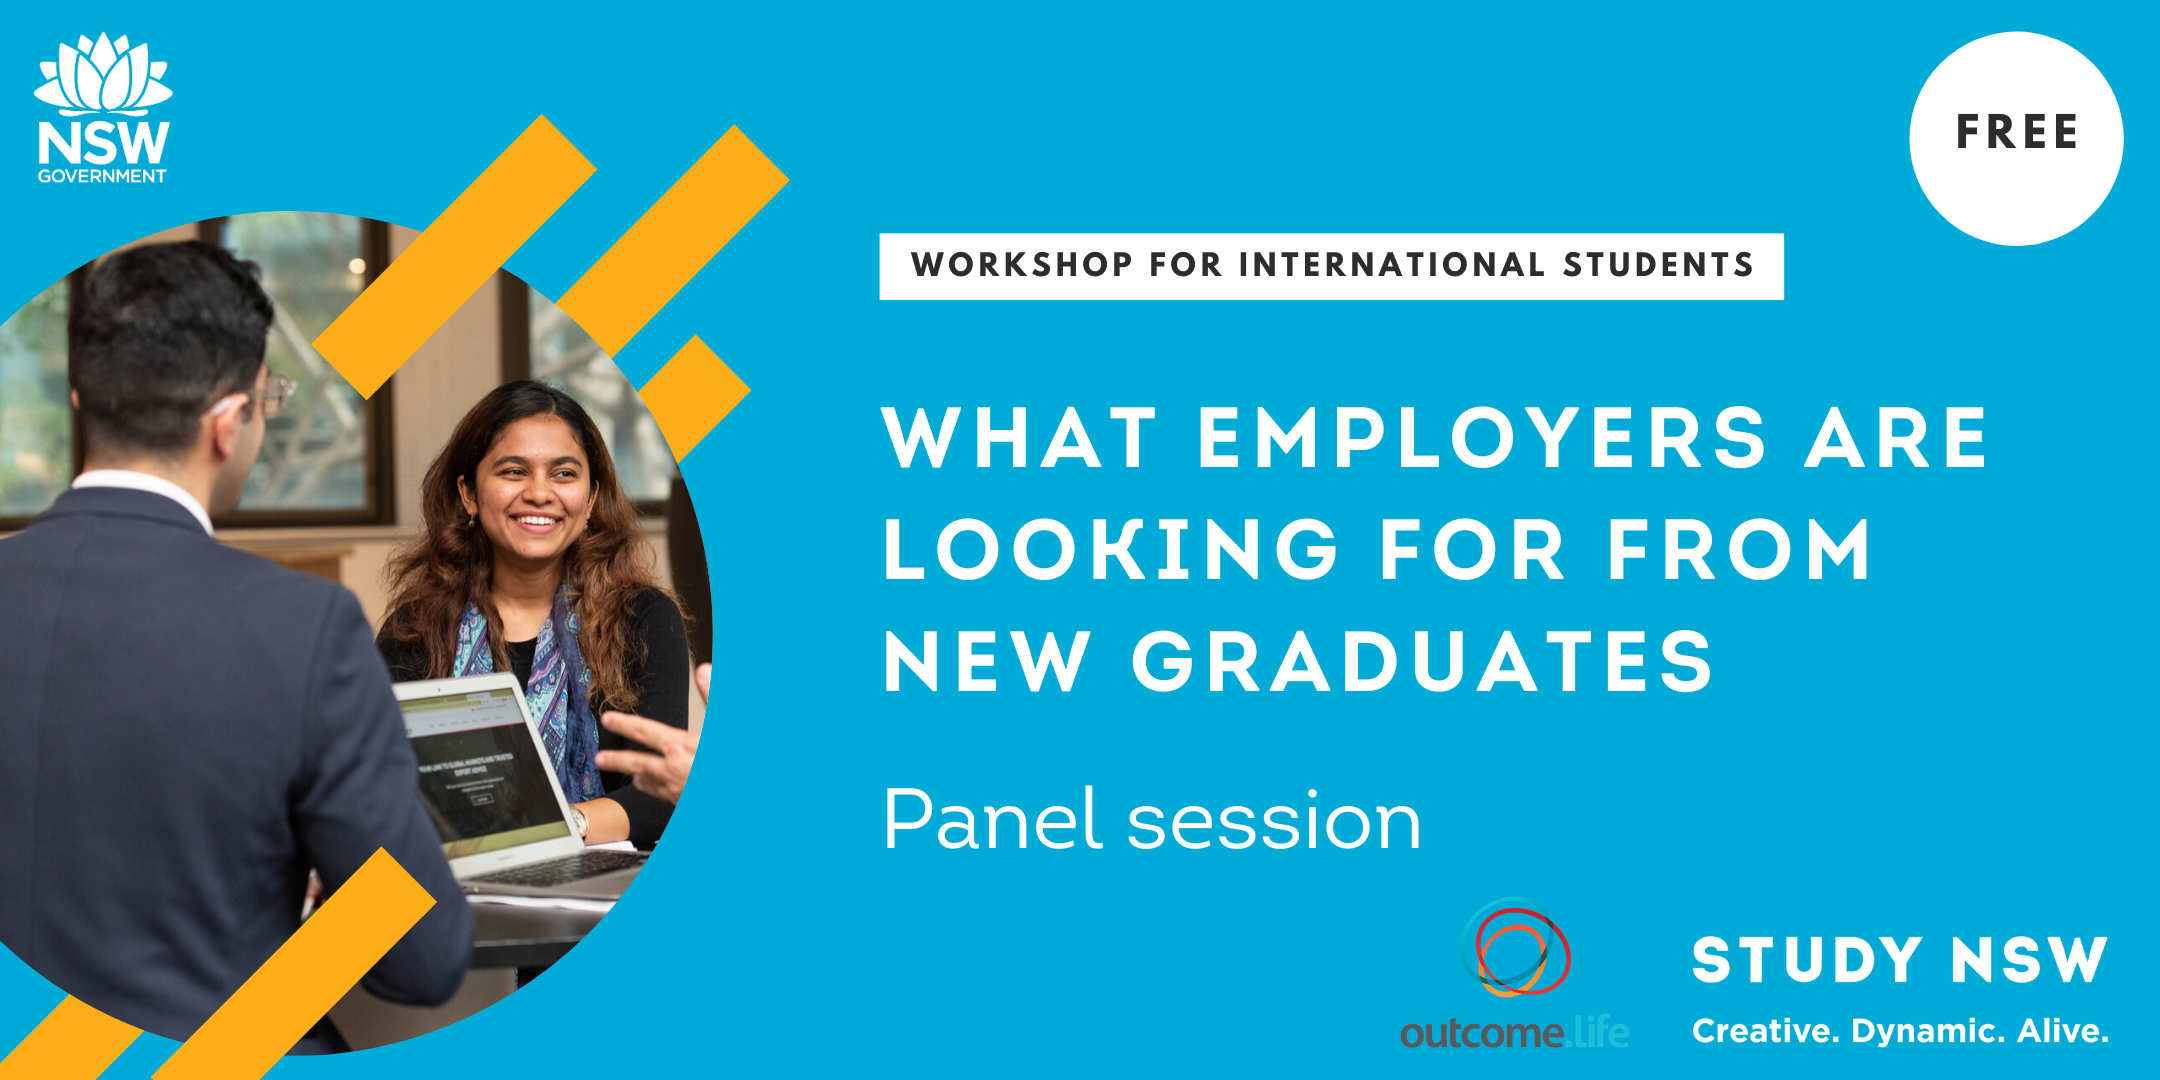 What employers are looking for from new graduates -Panel session